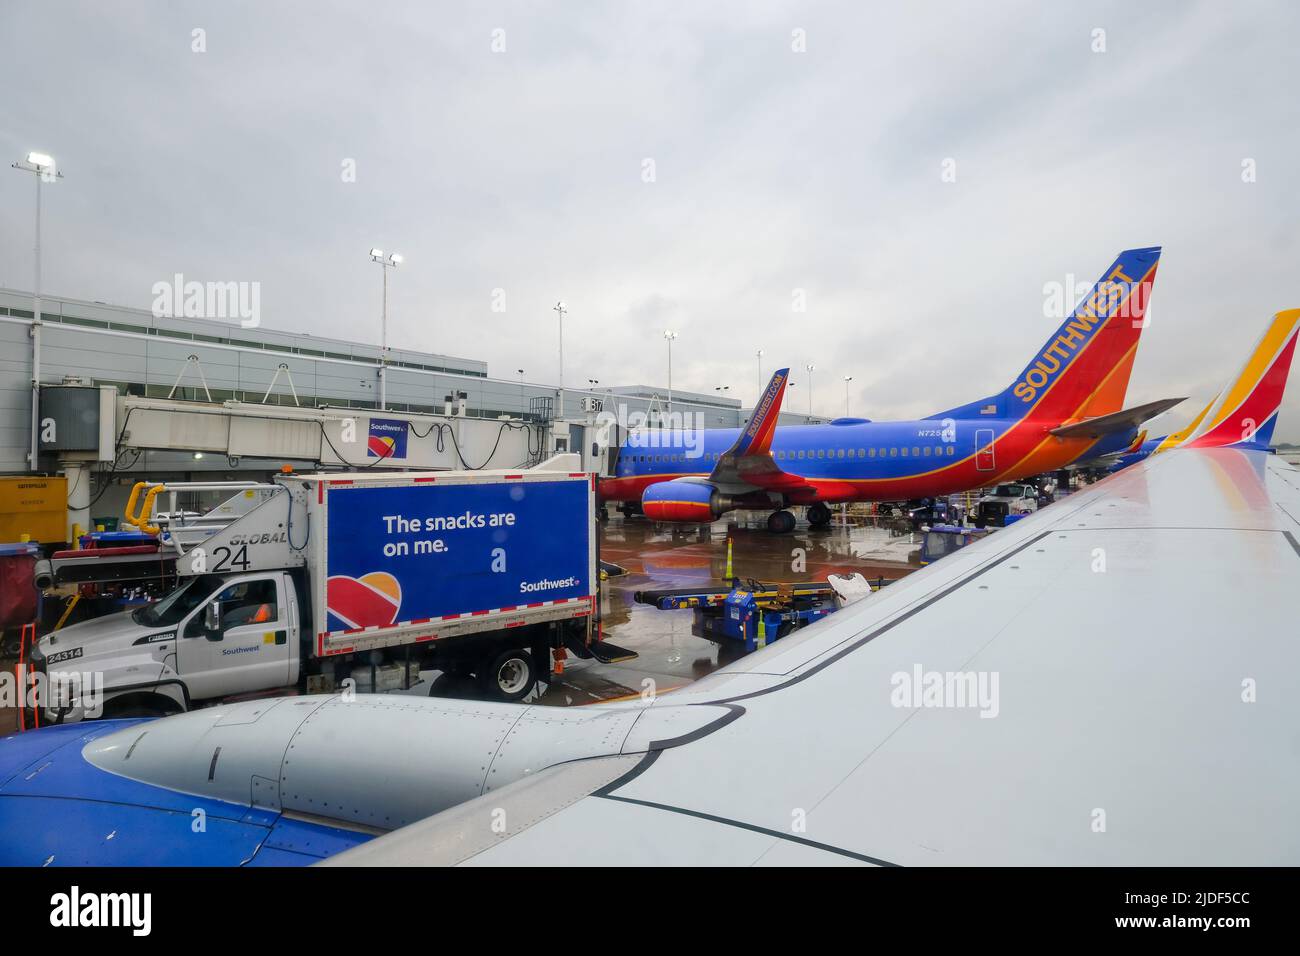 Stock images of South West Airlines at gate with plane support vehicles. Luggage and ground crew. Stock Photo